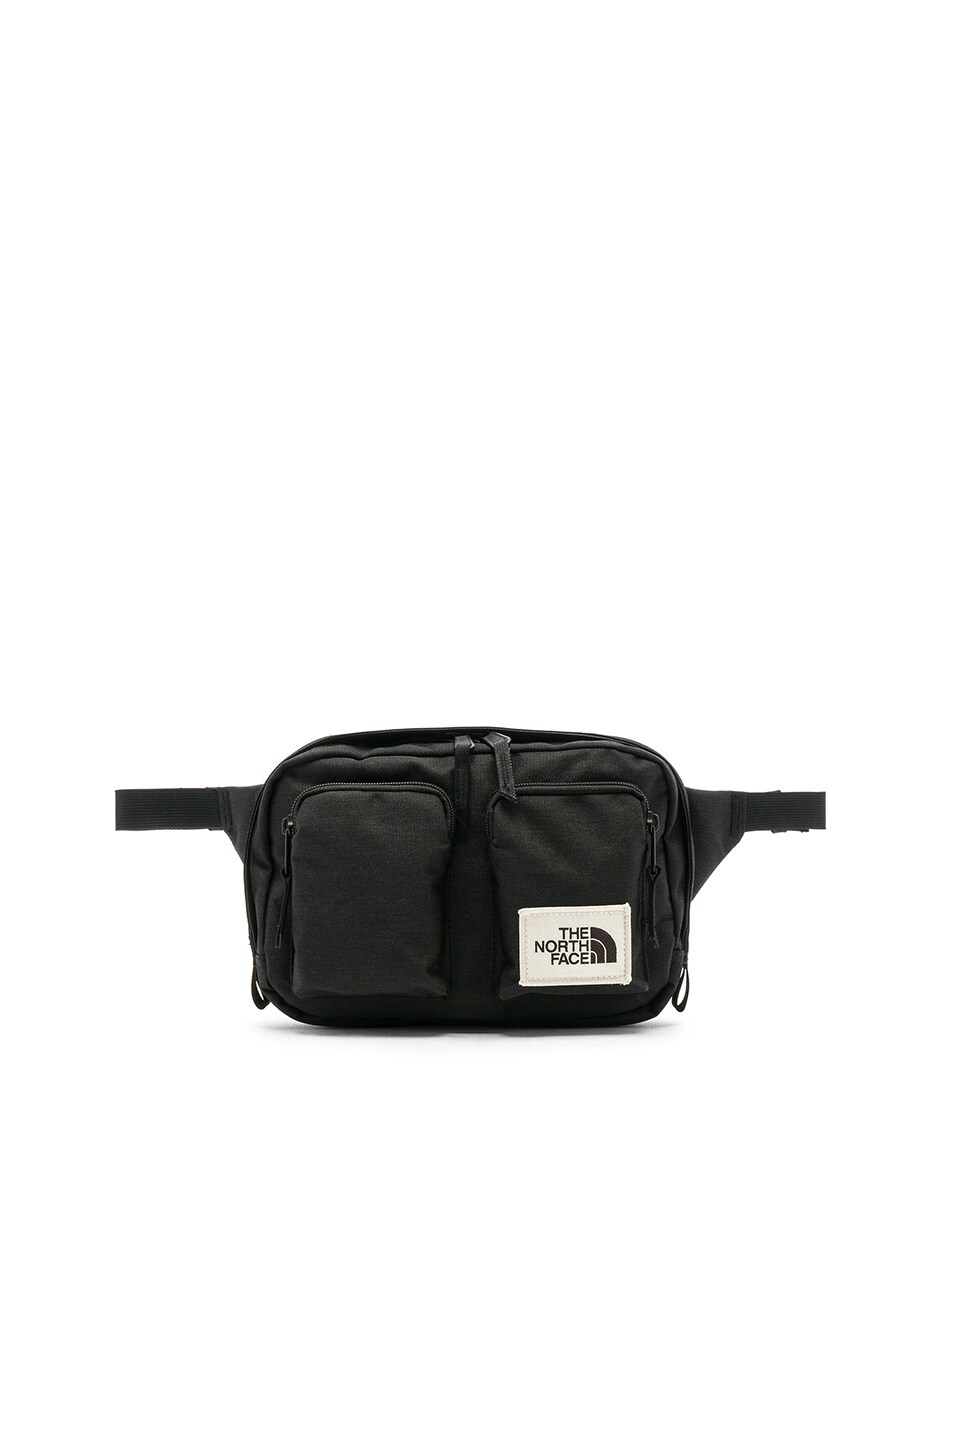 Image 1 of The North Face Kanga Bag in TNF Black Heather